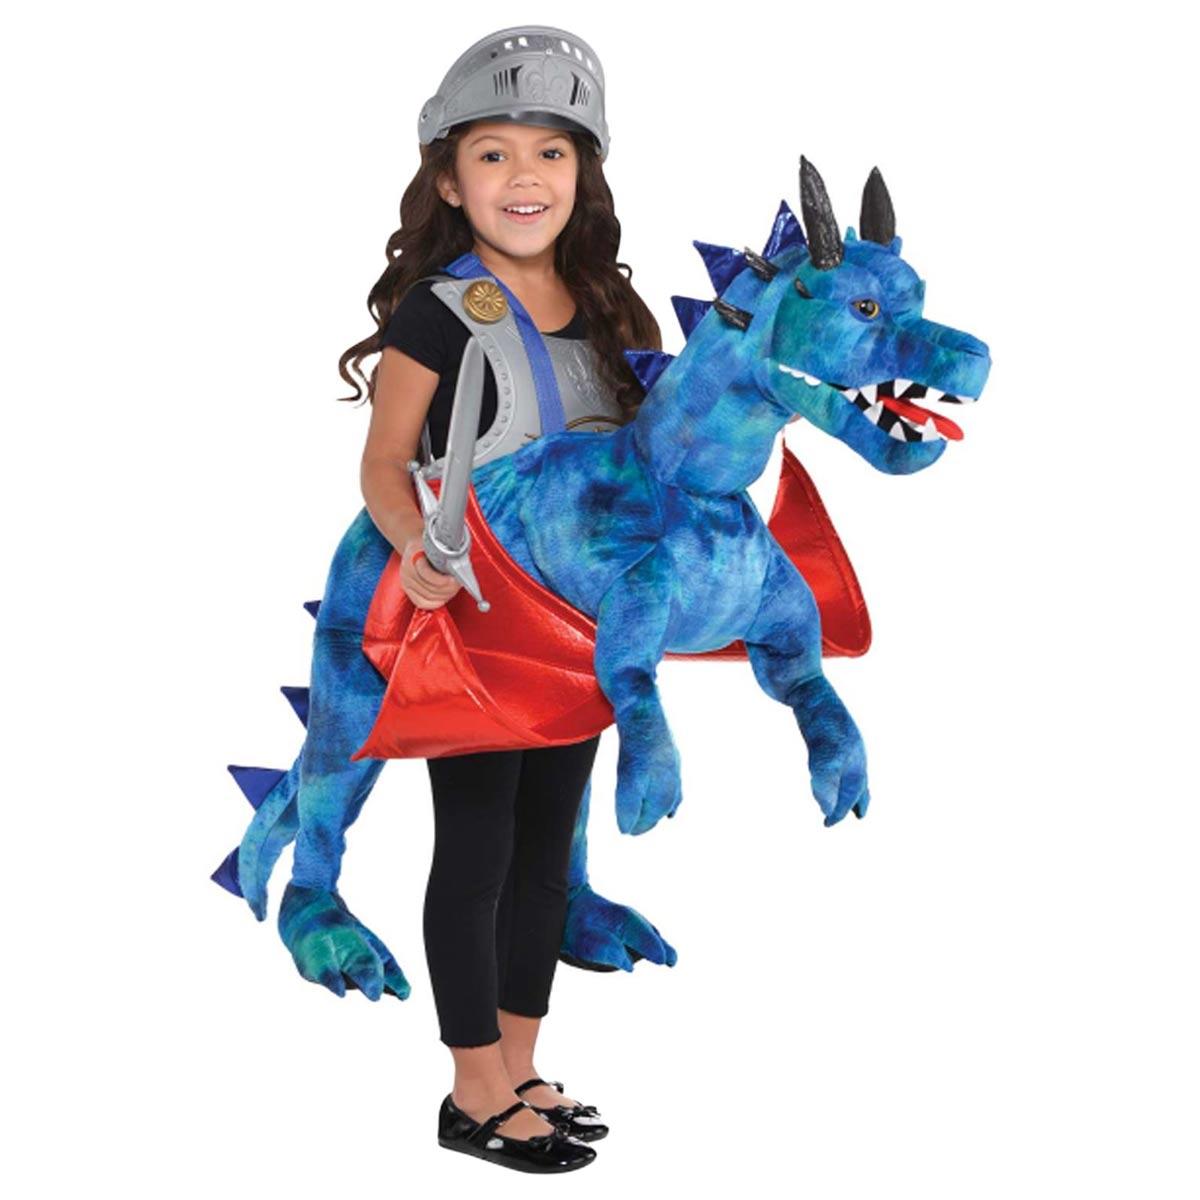 Ride on Dragon Fancy Dress Costume for boys and girls by Travis Designs RDR available here at Karnival Costumes online party shop